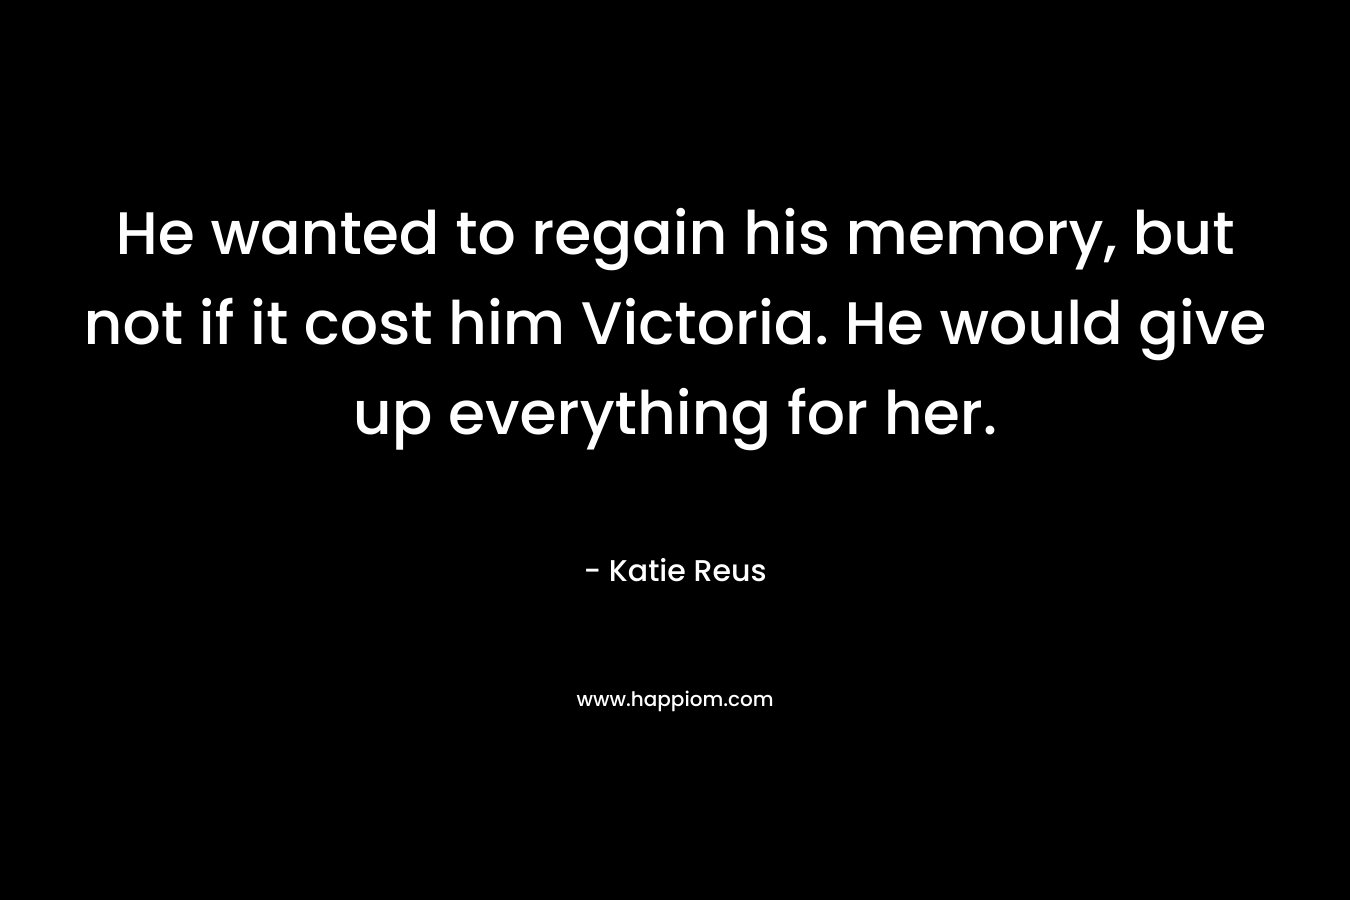 He wanted to regain his memory, but not if it cost him Victoria. He would give up everything for her. – Katie Reus